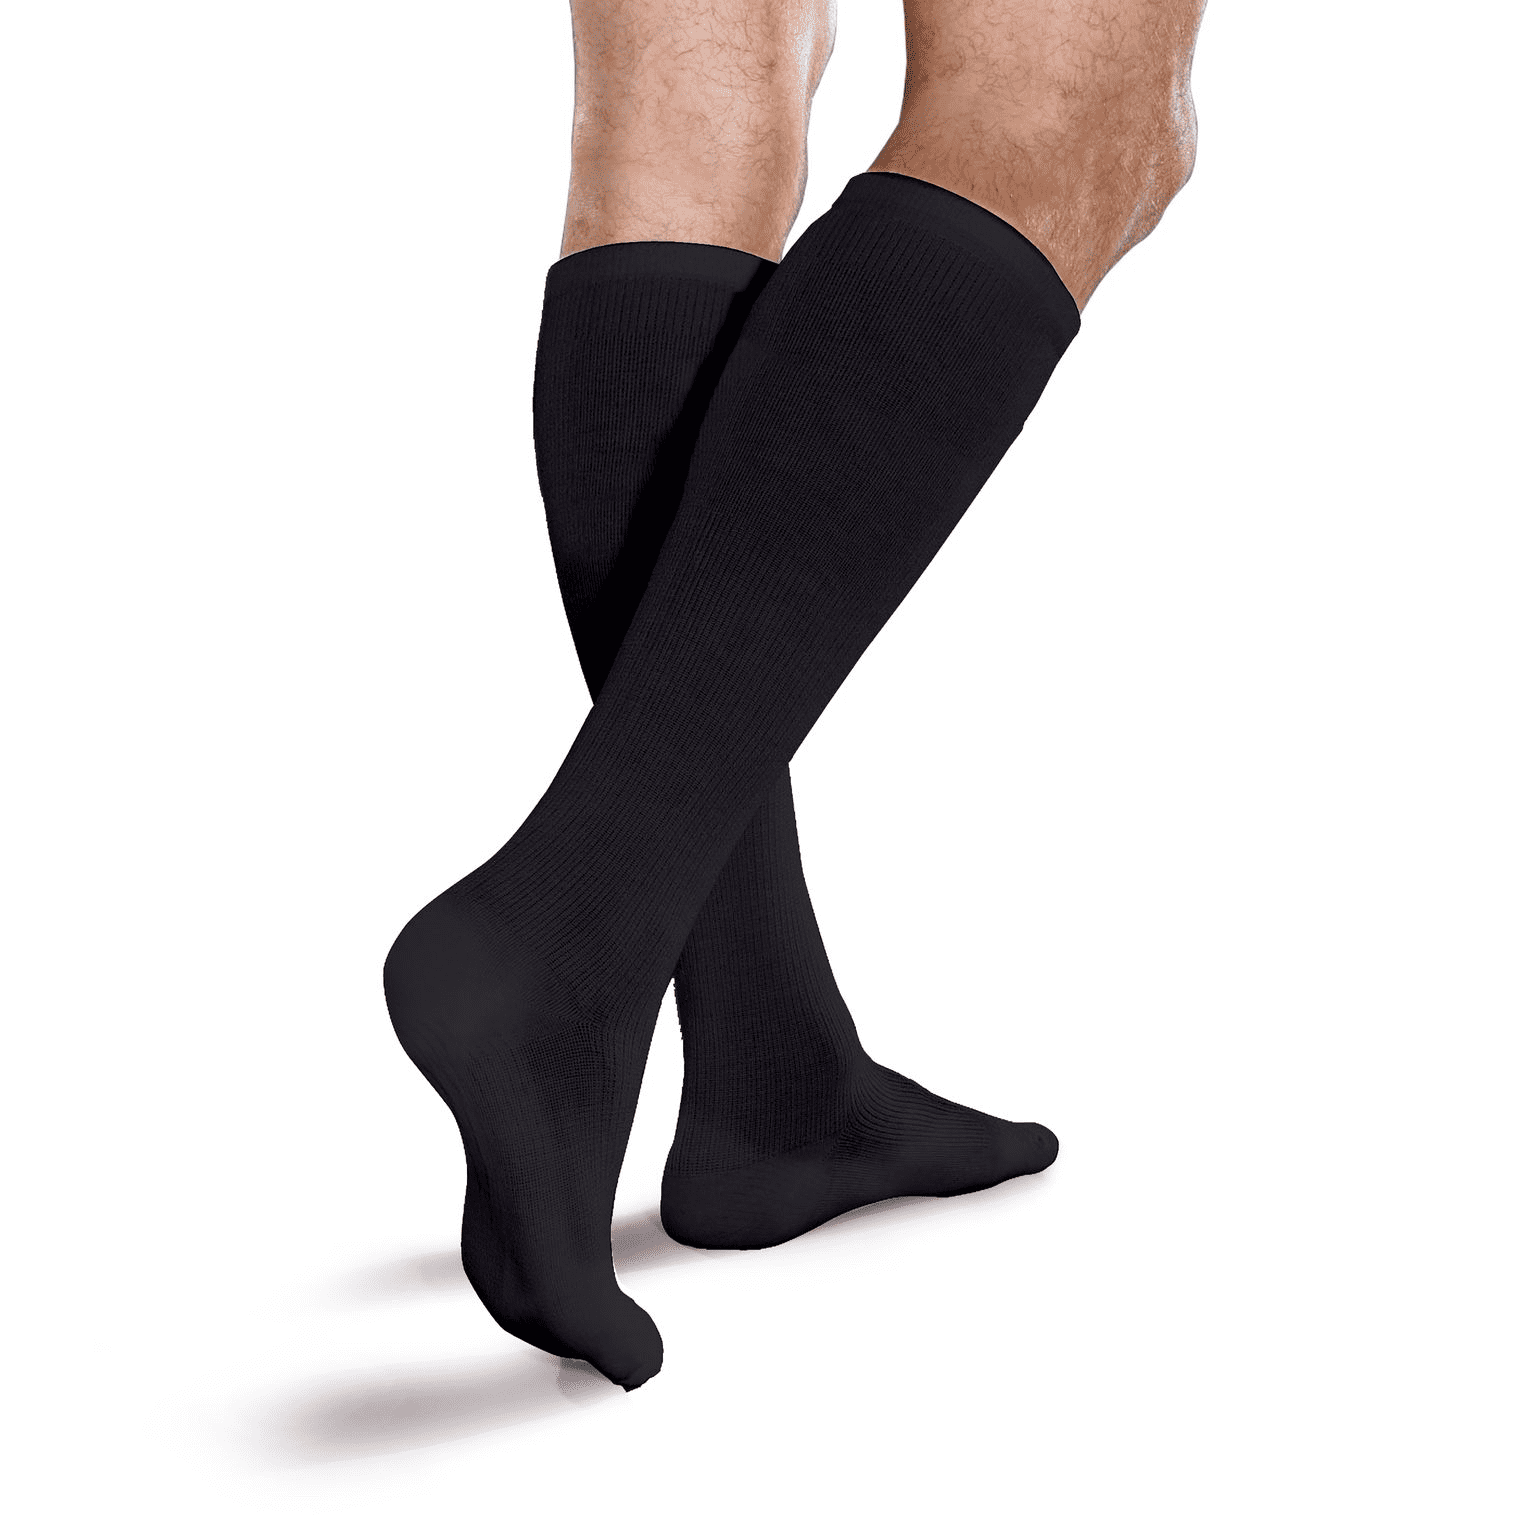 Core-Spun by Therafirm 15-20mmHg Moderate Support Compression Socks ...